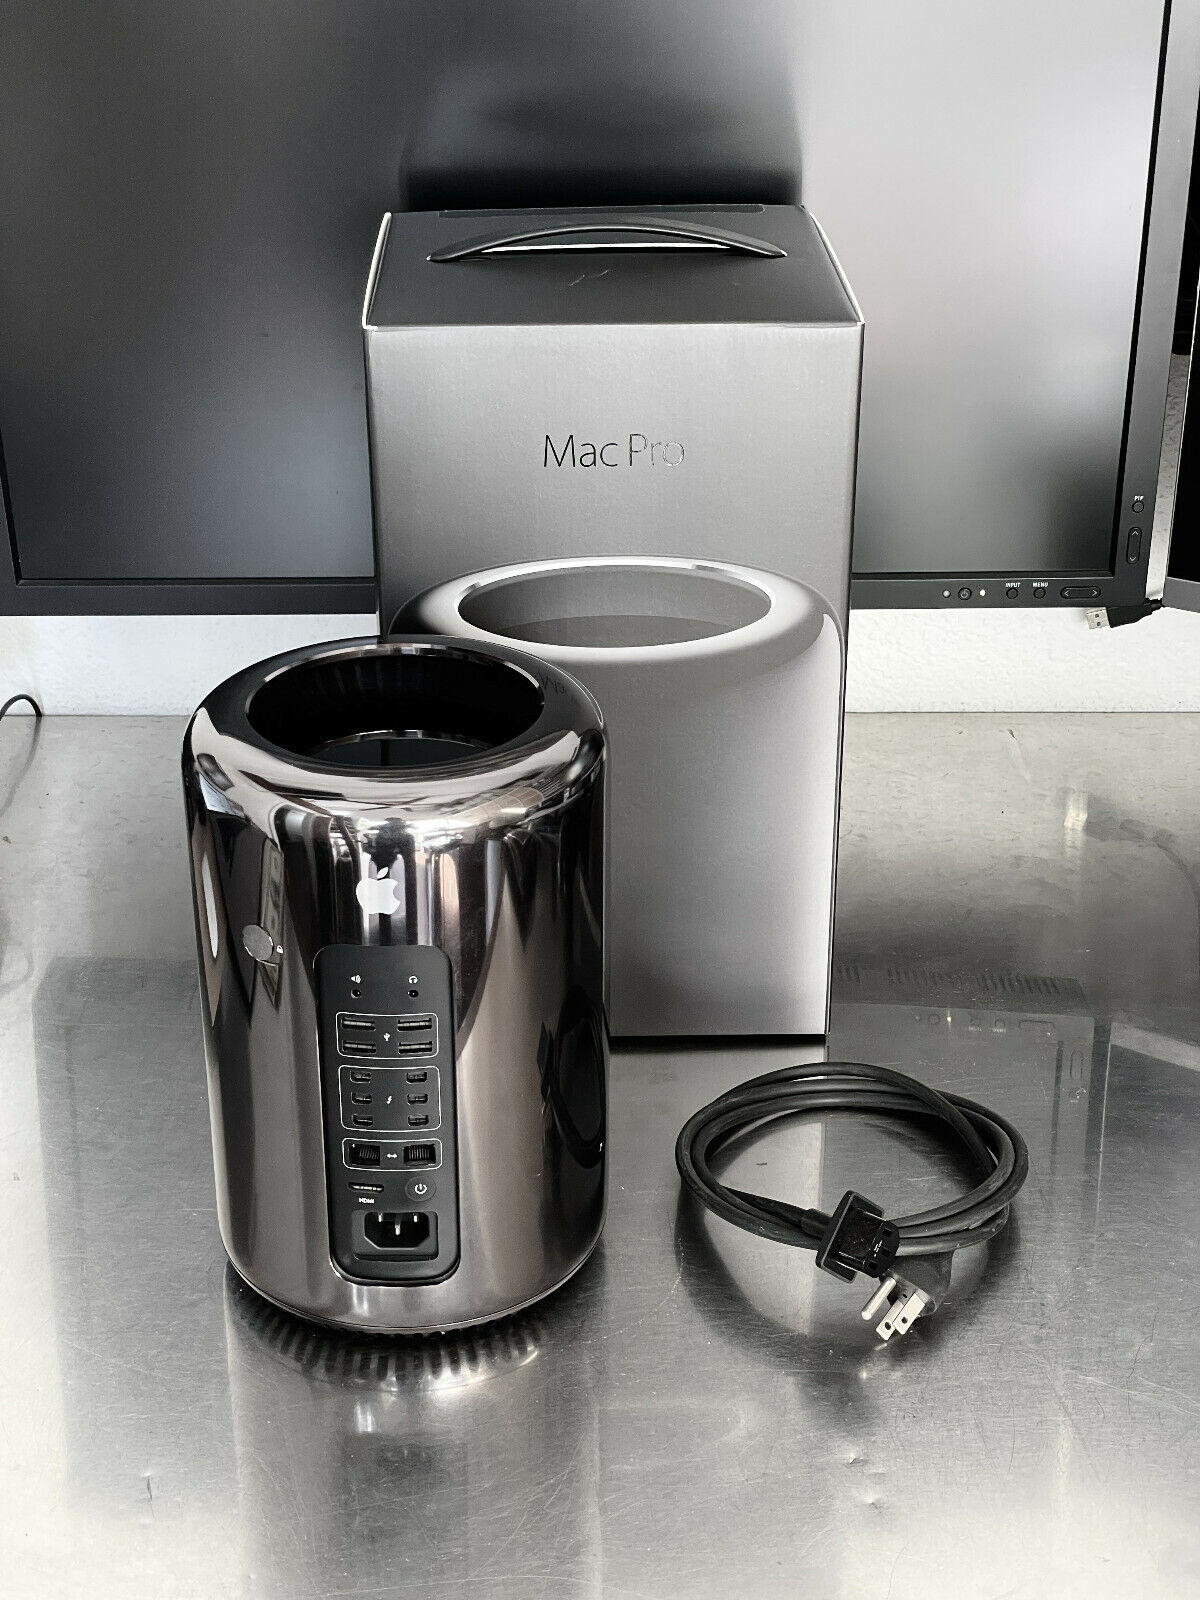 Apple MacPro 2013 8 Core 3GHz 16GB RAM 512GB SSD D700 Graphics Video A1481